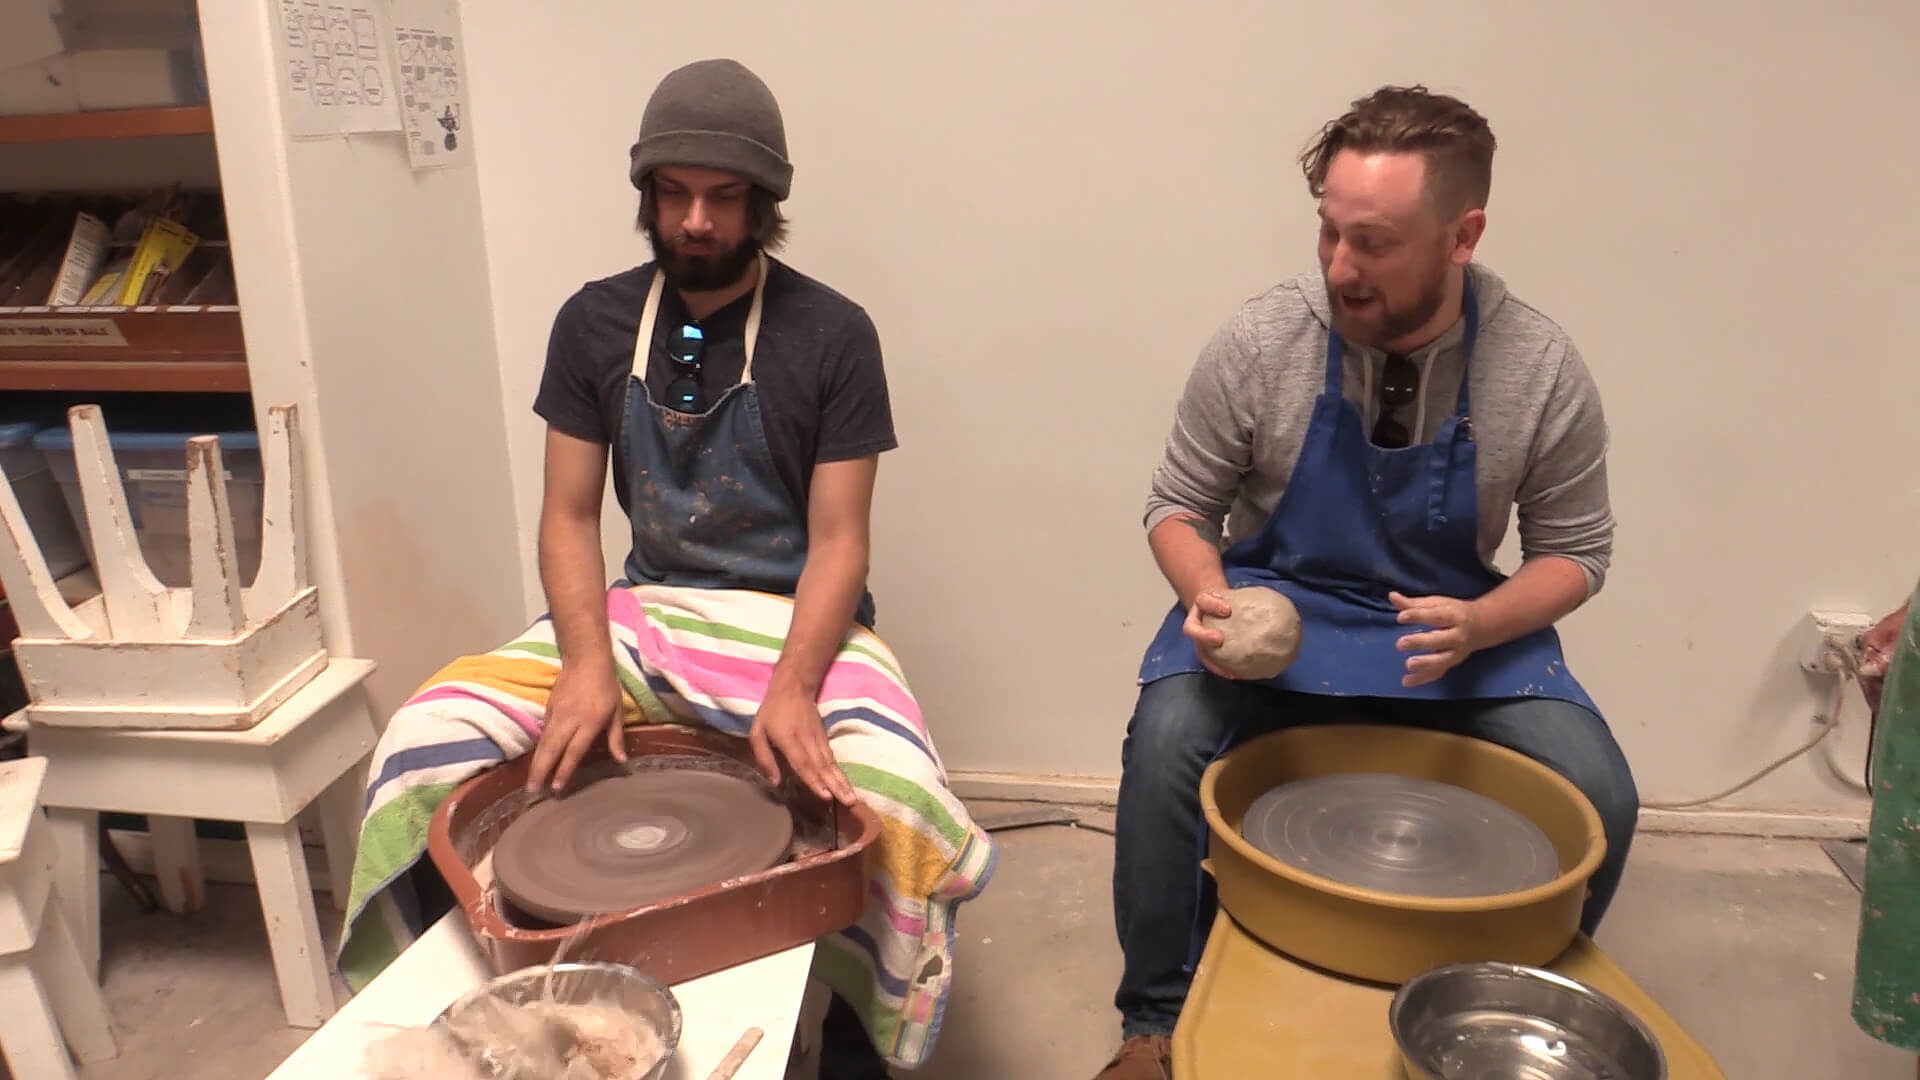 Mike and Alex enjoy pottery from Good Mythical Crew produced by Todd Bishop